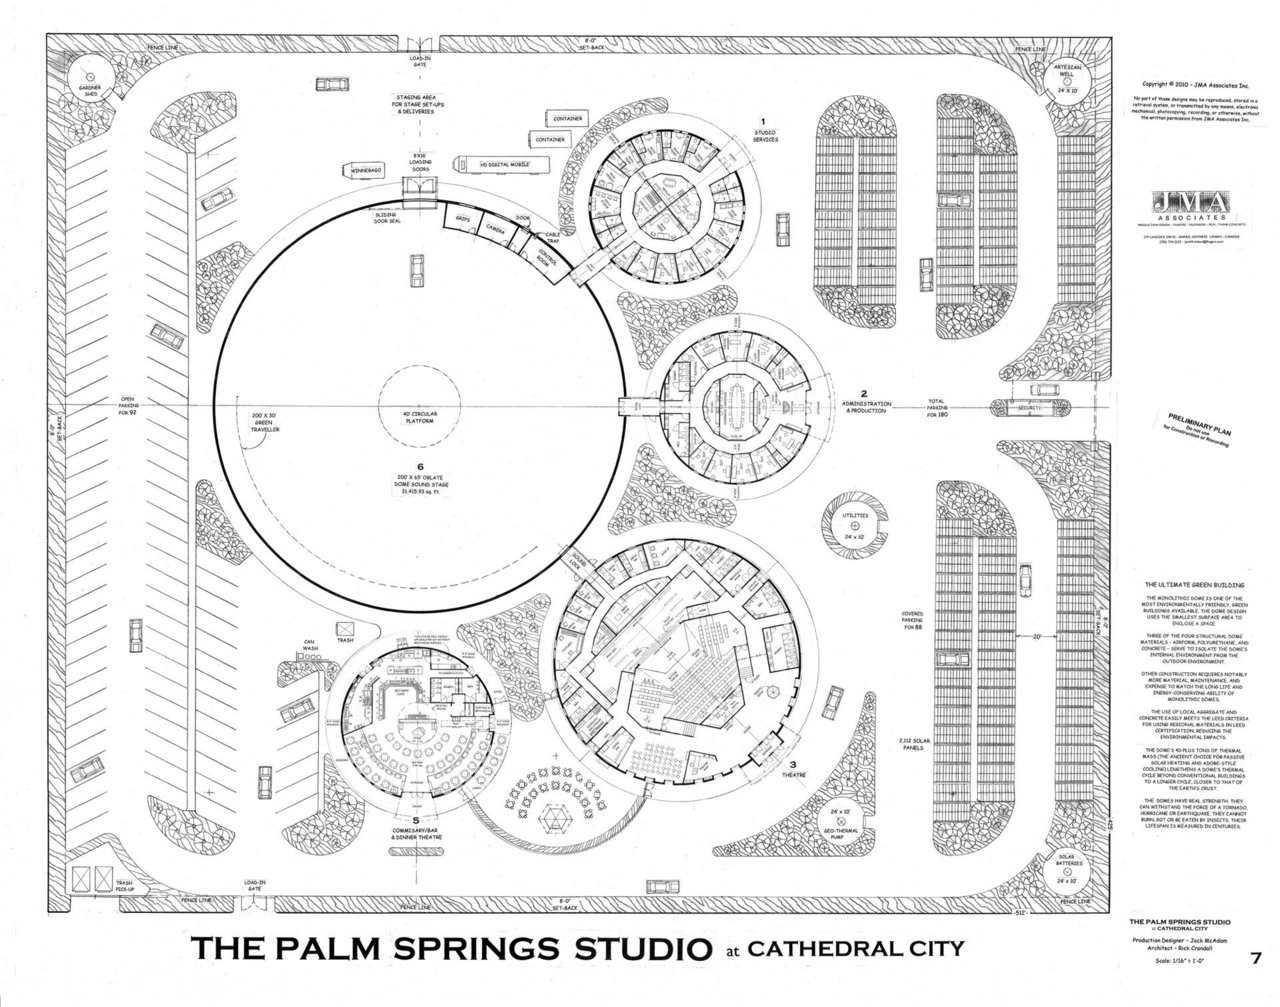 Palm Springs Studio Facility at Cathedral City